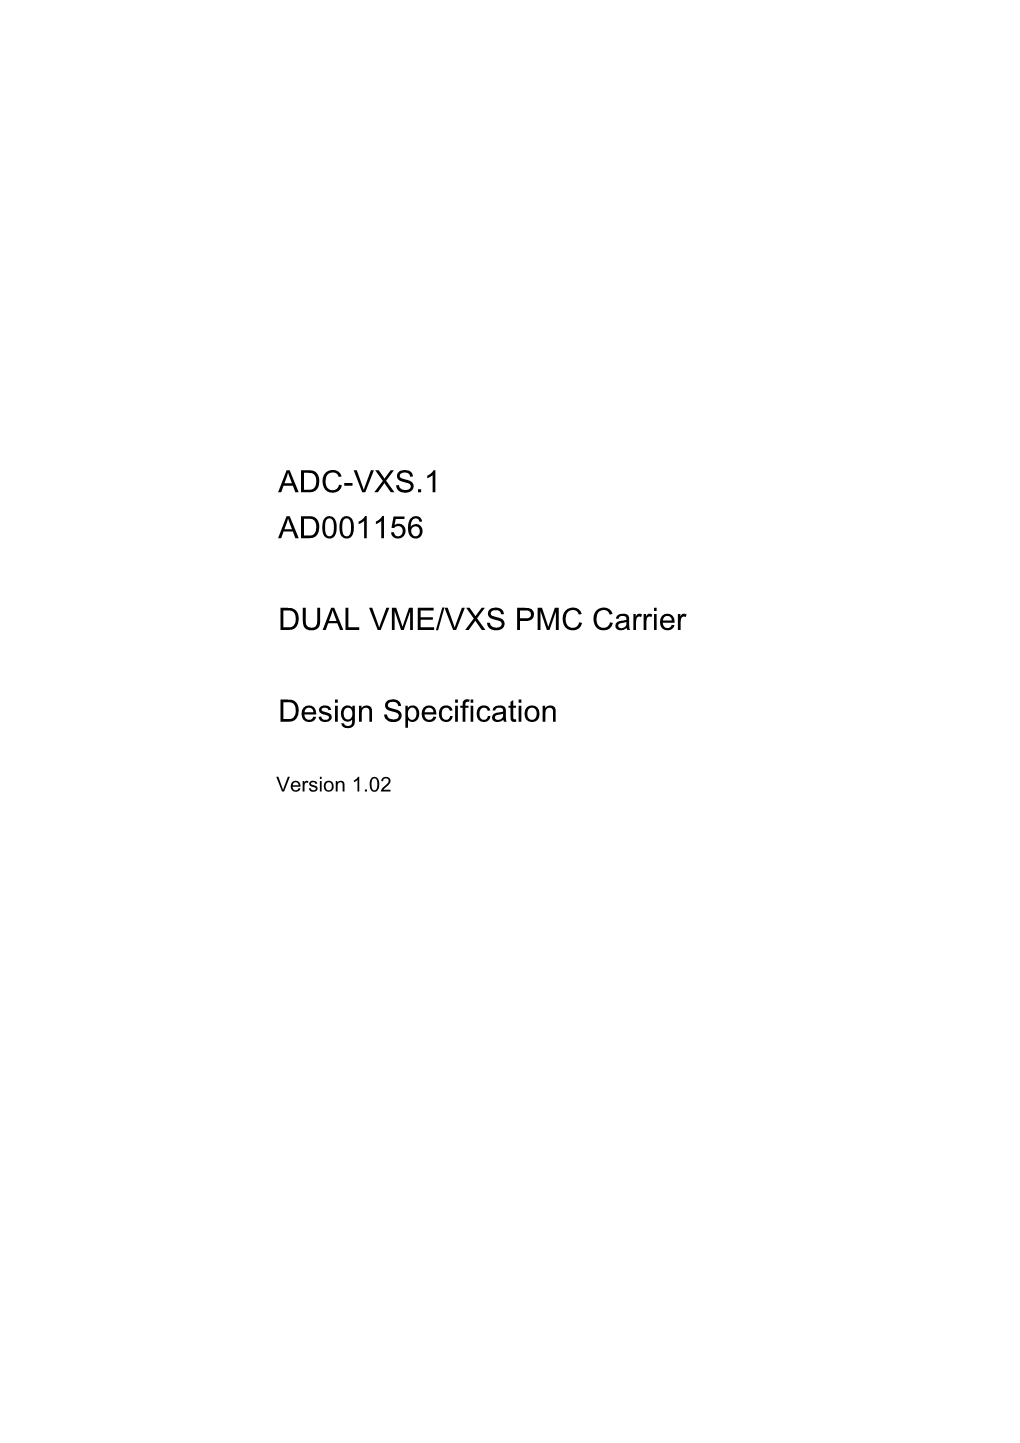 ADC-VXS.0 Design Specification